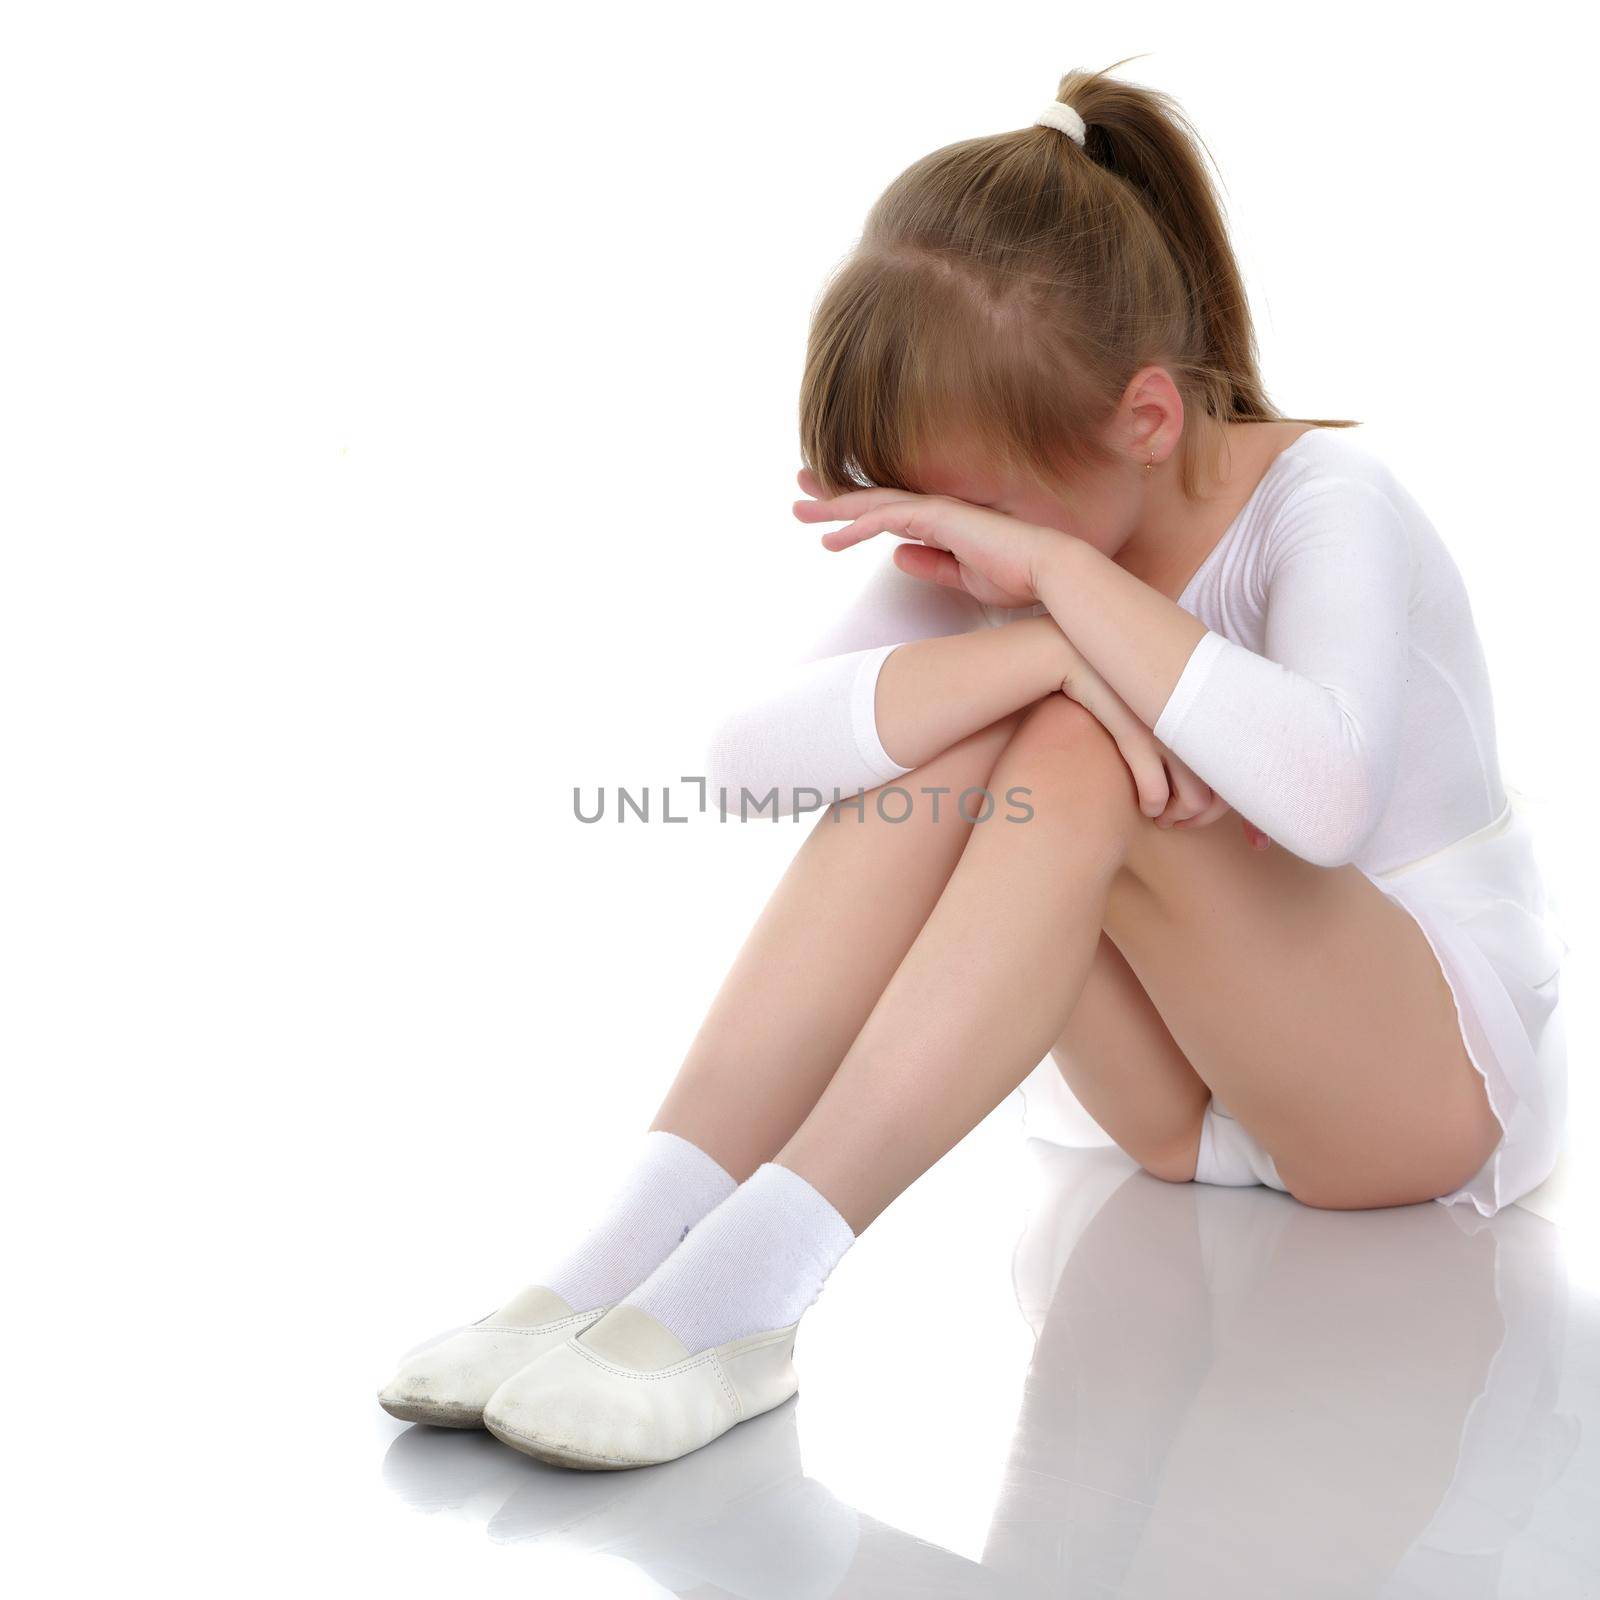 A sweet little gymnast girl is upset, she sits on the floor and cries. The concept of sport, children's emotions. Isolated on white background.